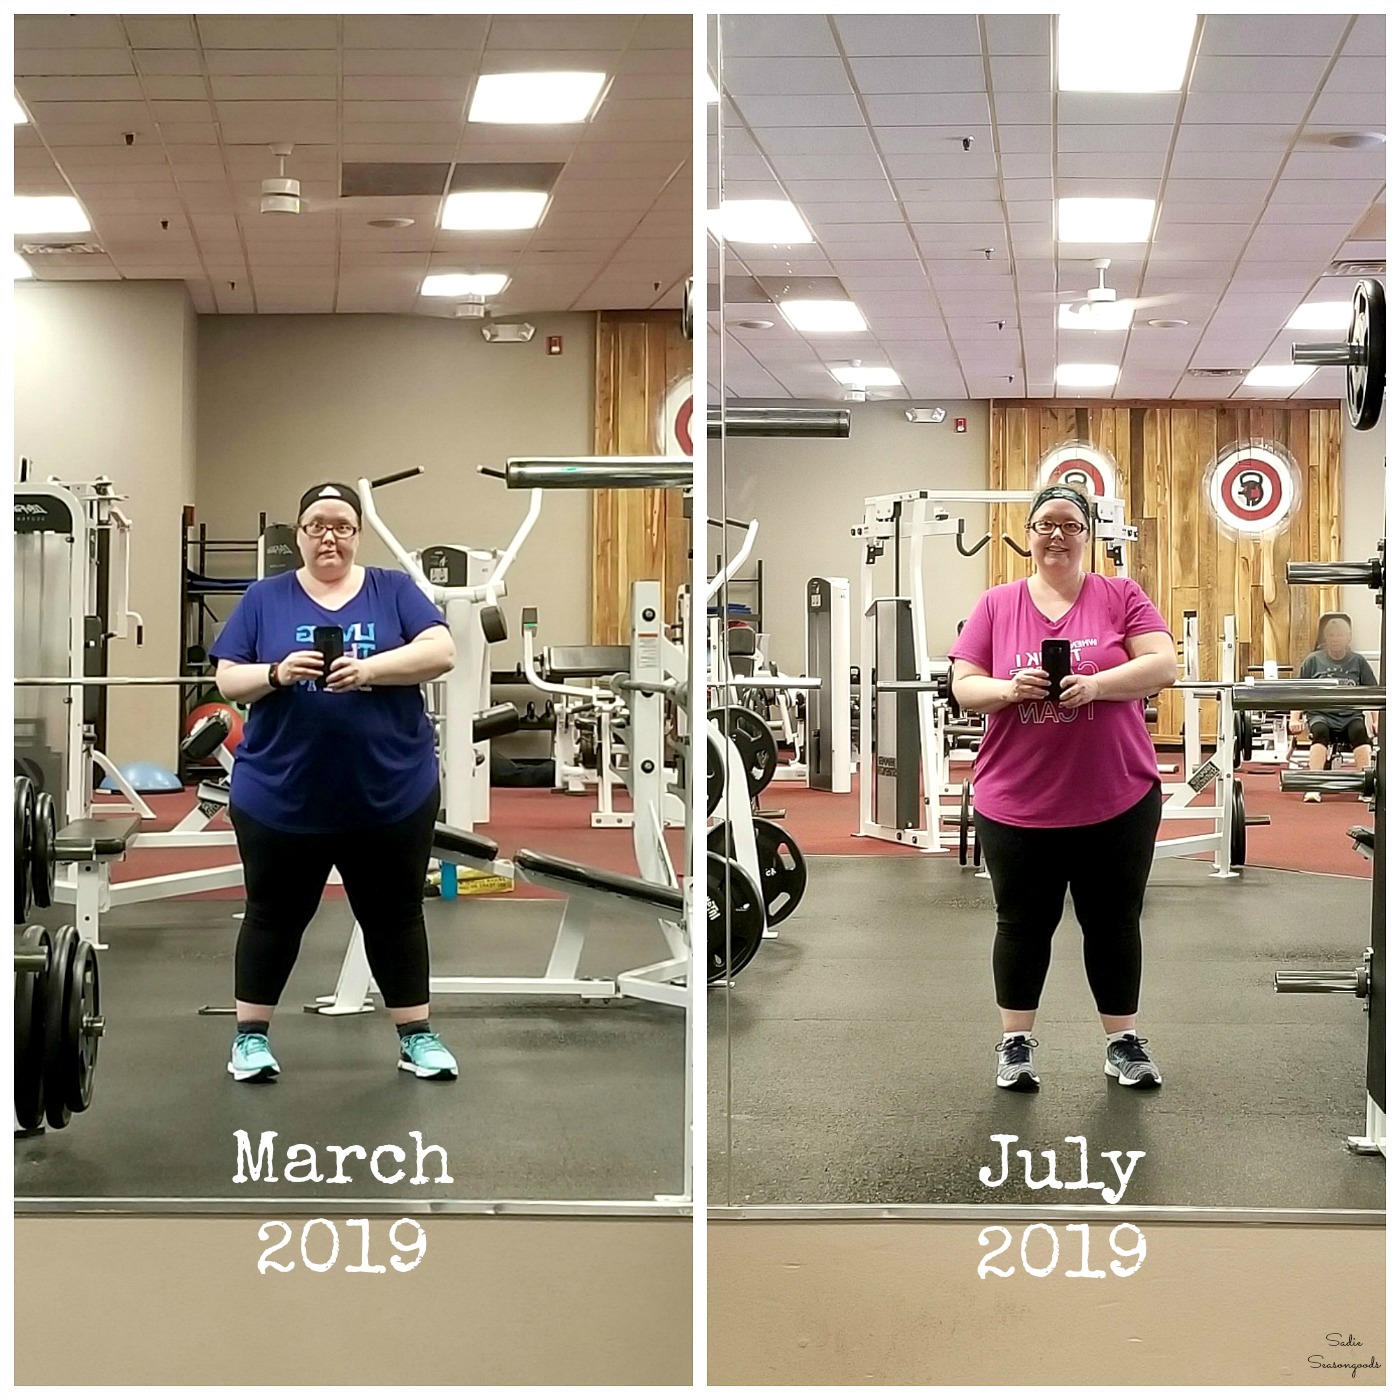 Losing 12 pounds with portion control and clean eating and working out at Crush Fitness in Greenville SC